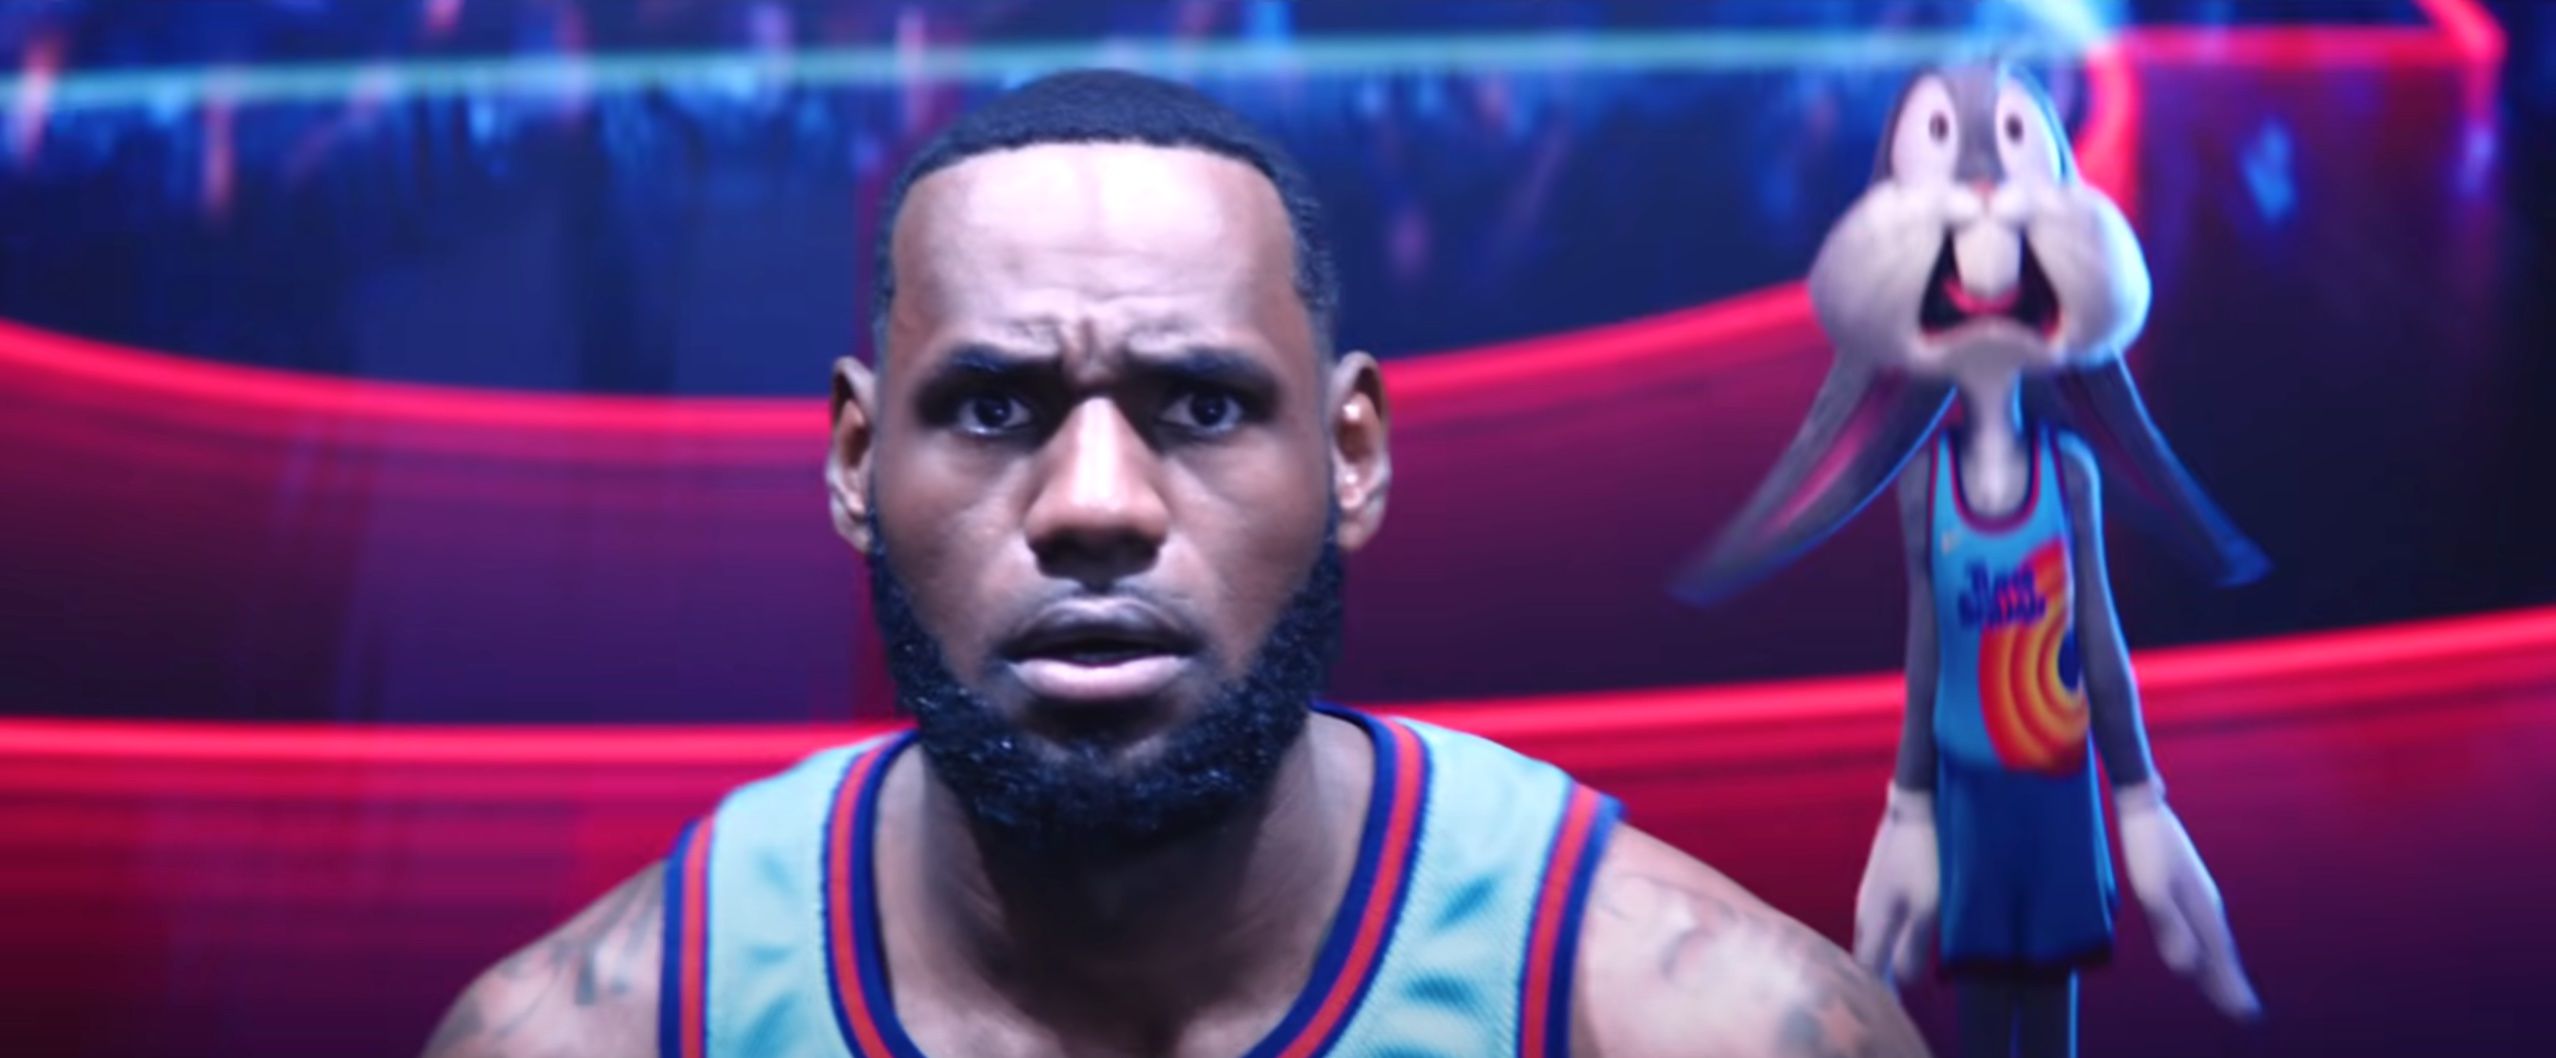 Space Jam: A New Legacy': LeBron James Reveals Tune Squad Jersey